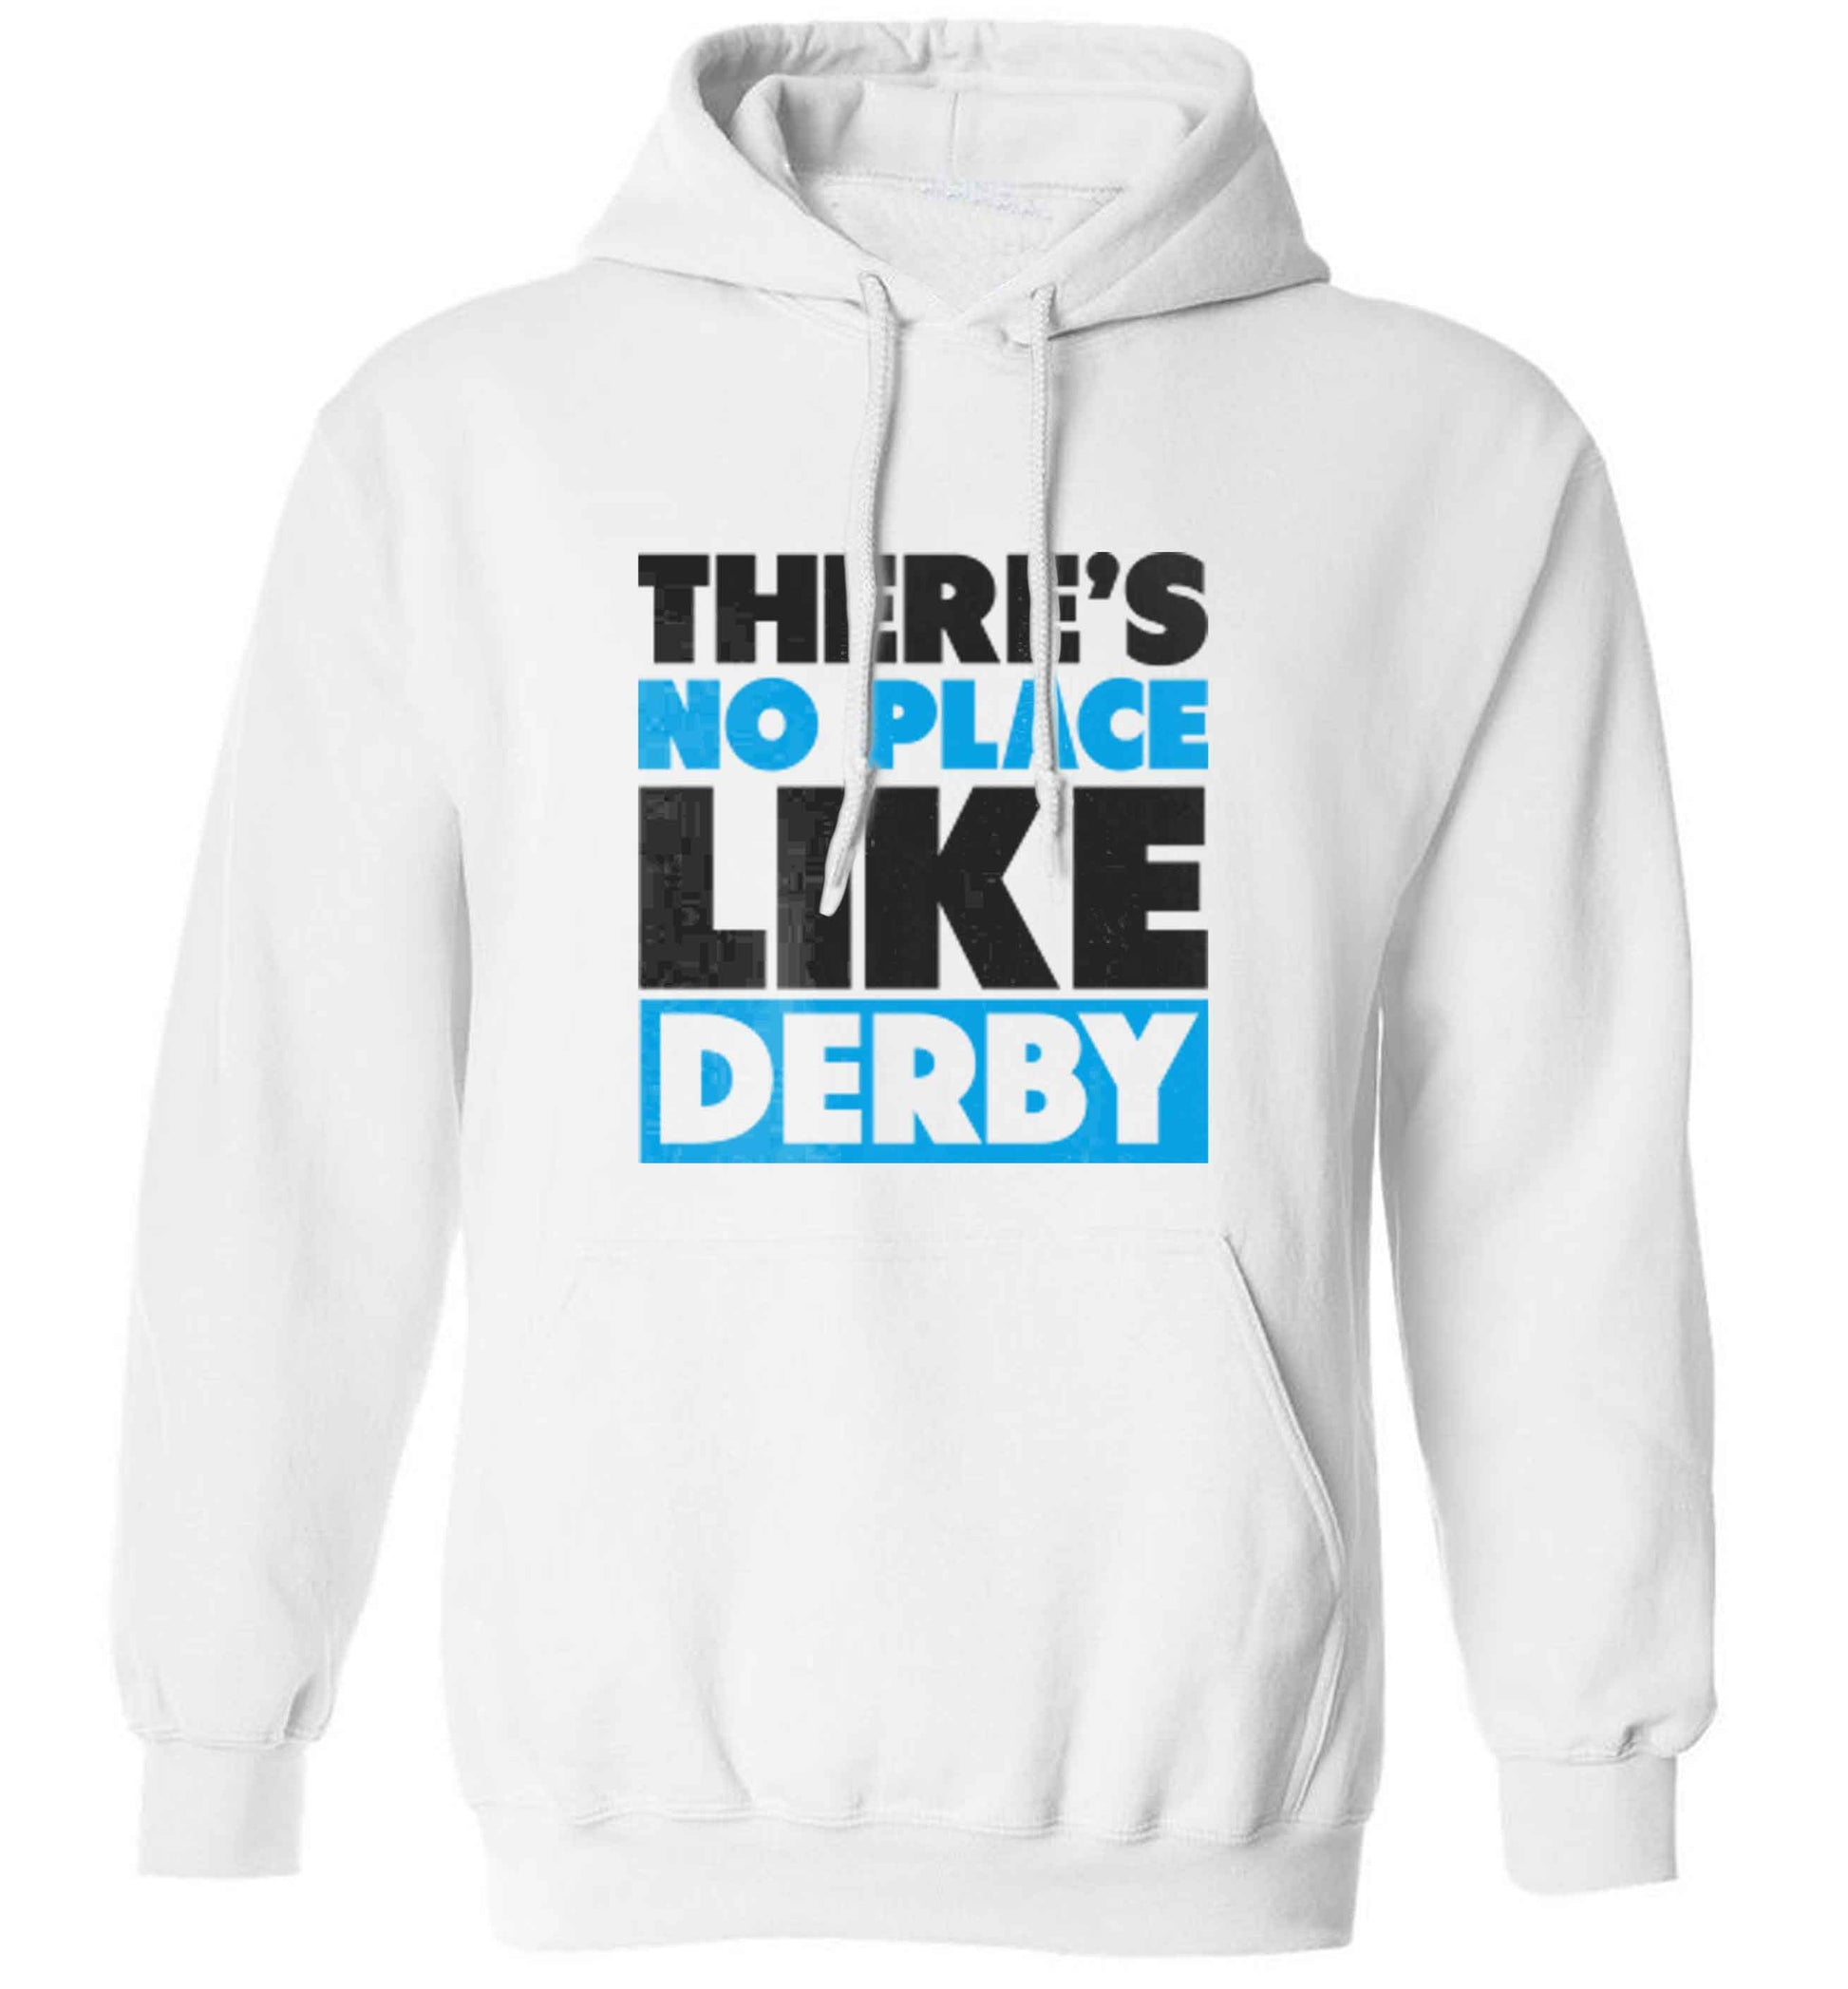 There's no place like Derby adults unisex white hoodie 2XL